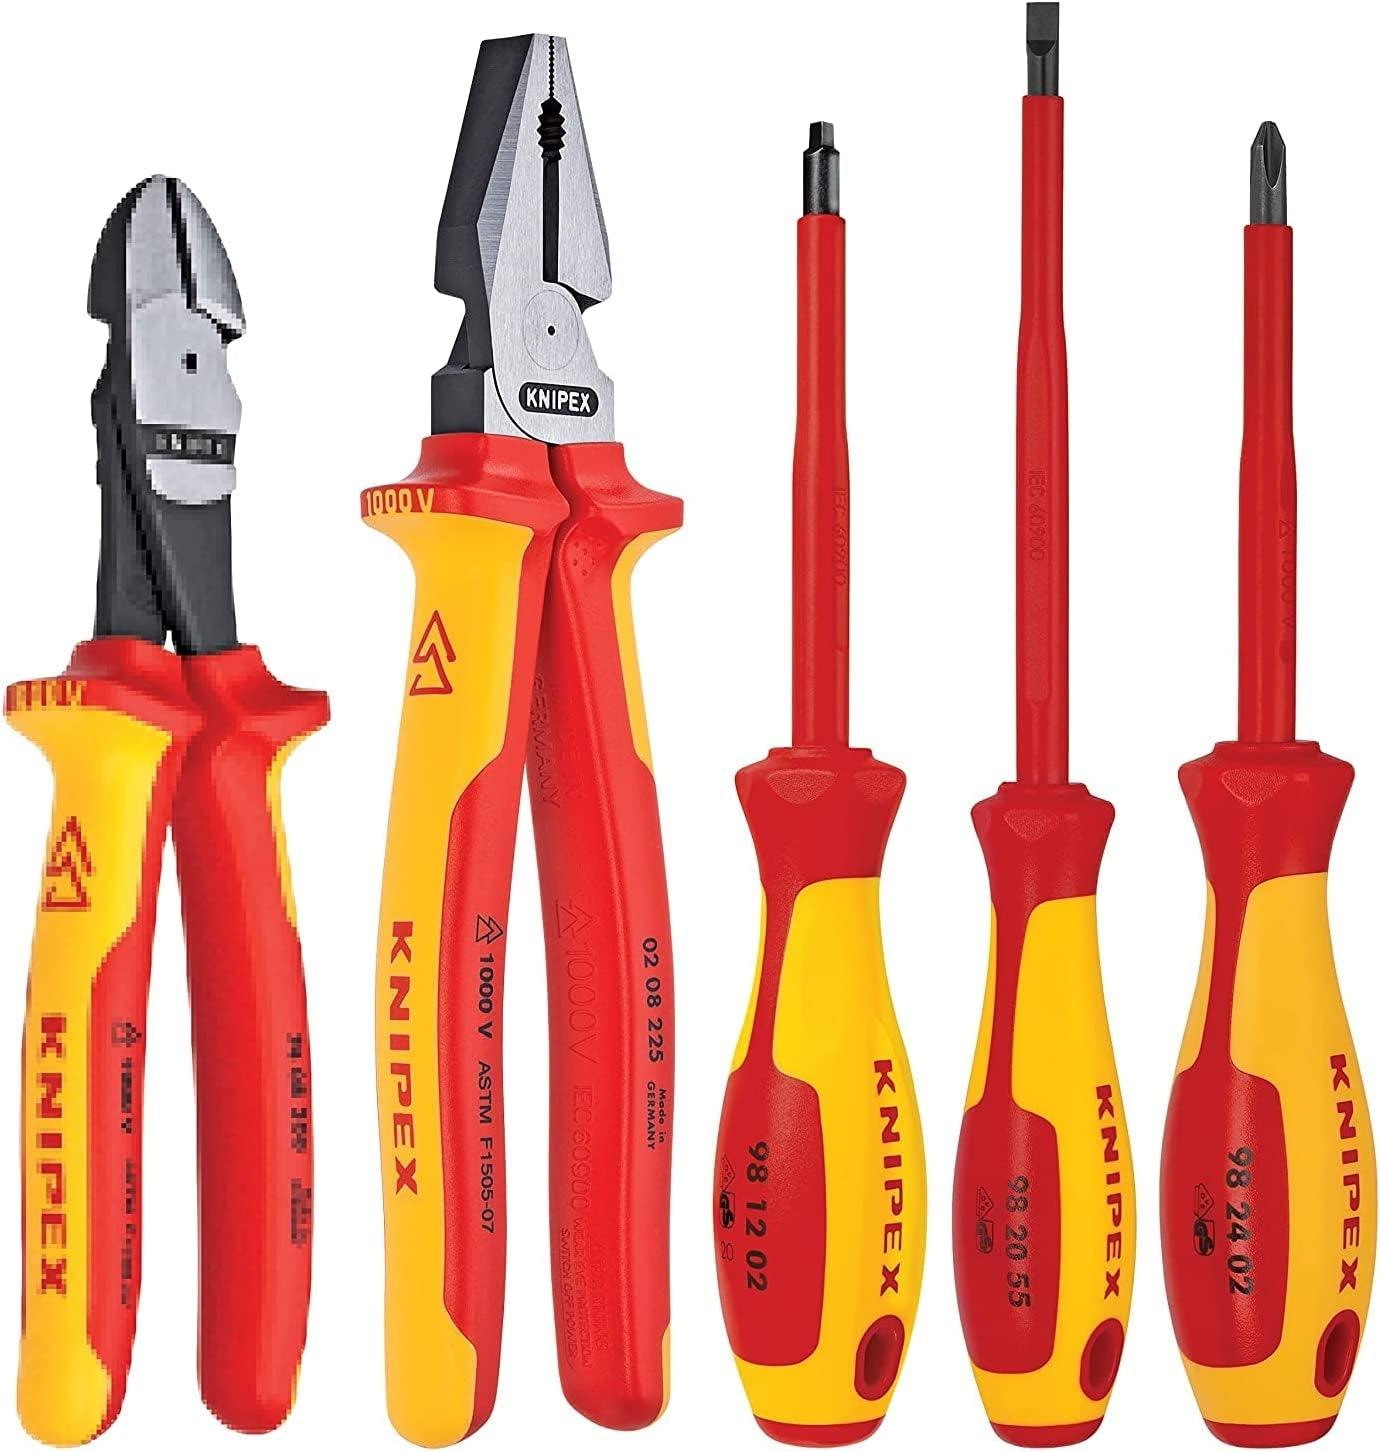 7-Piece 1000V Insulated Pliers, Cutters, and Screwdriver